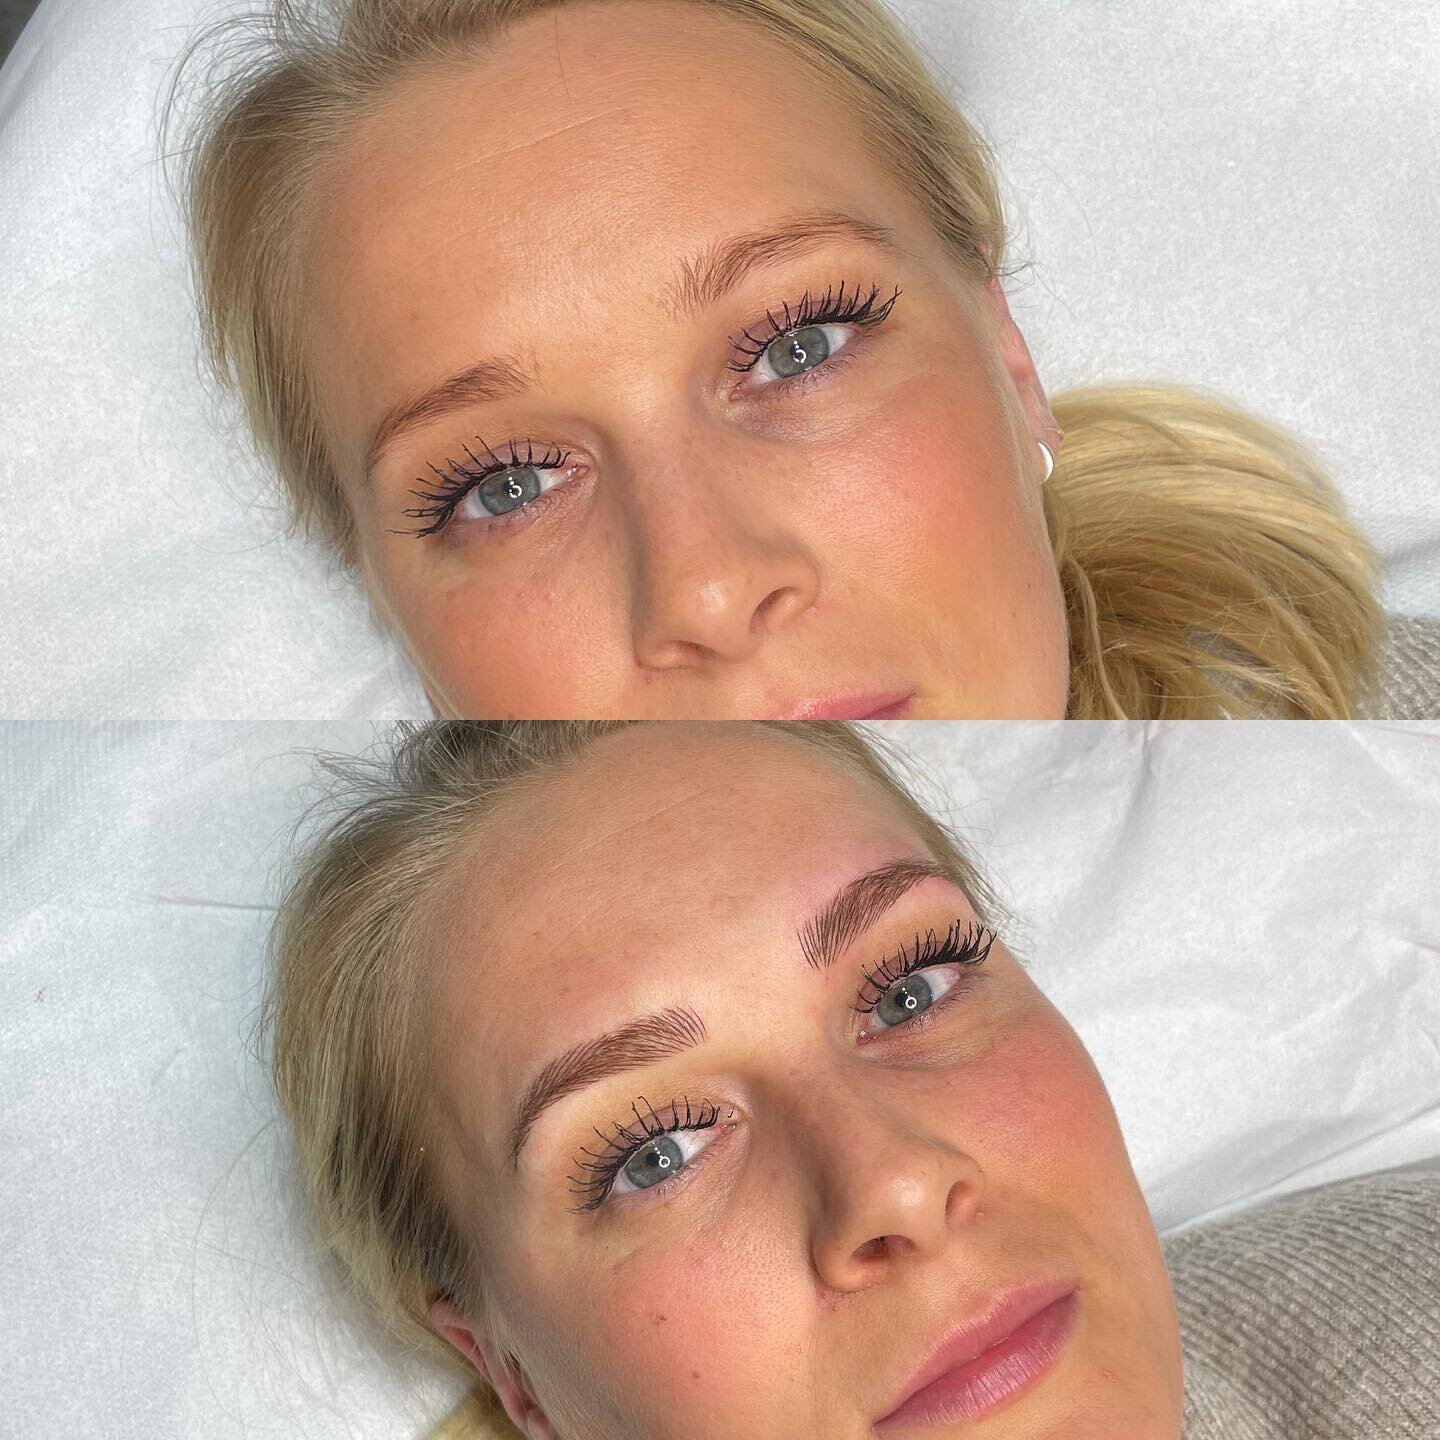 Some brows just need a little help to add shape and definition. 🪄 
When the natural hair grows down the eye socket I will always try to add a soft arch to add a soft angle to compliment the facial features. 

Want to have a chat about having your br